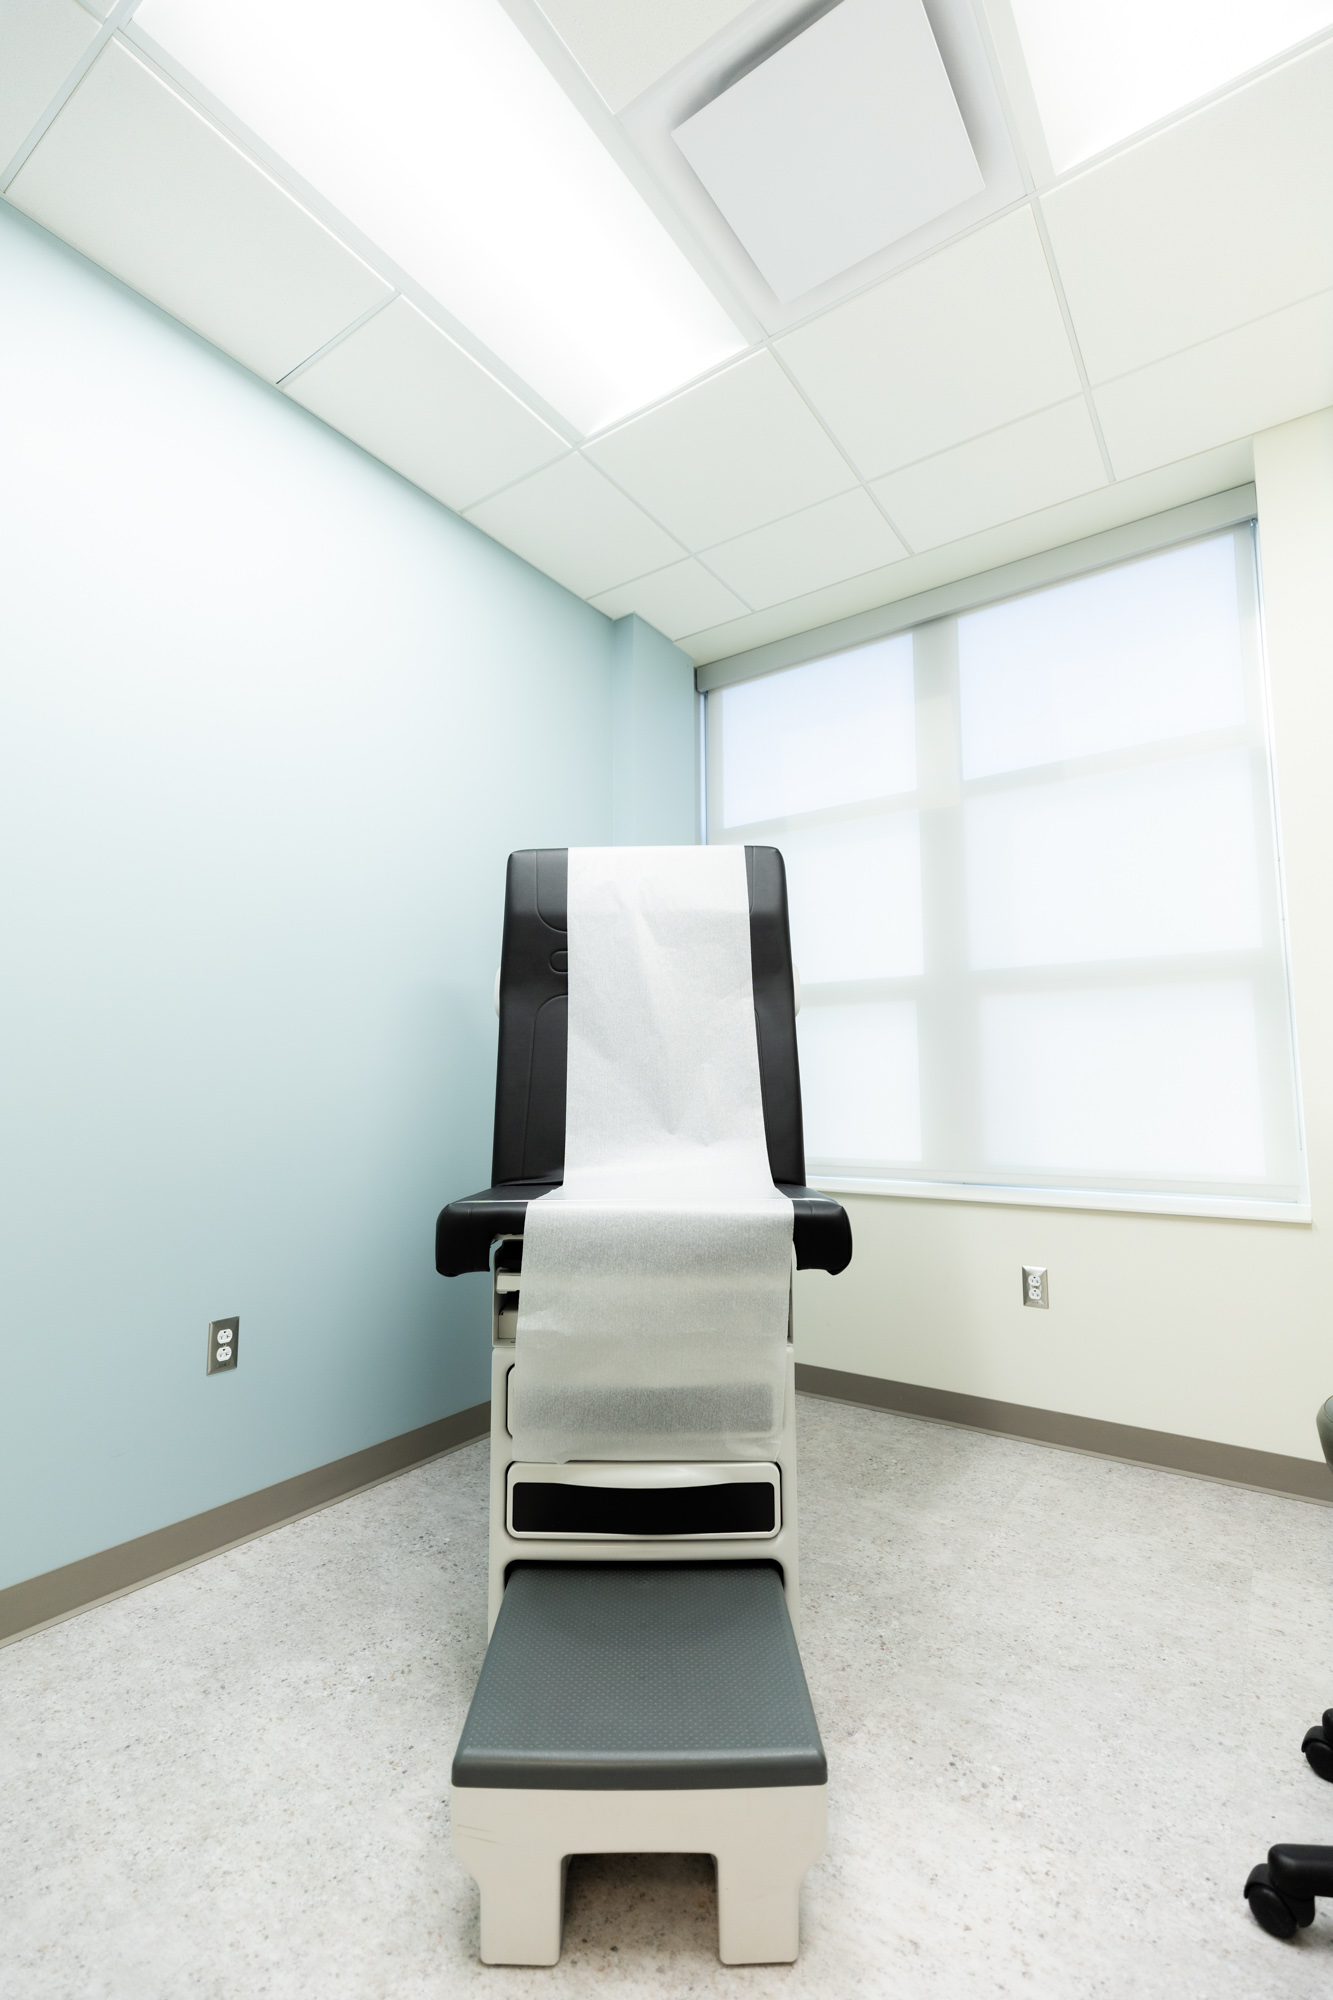 Image shows one corner of an examination and treatment room. There is a medical examination chair with a layer of thin white paper over it, much like a chair you might see at a regular physician's office. There is a window in the back but the blinds are pulled down.